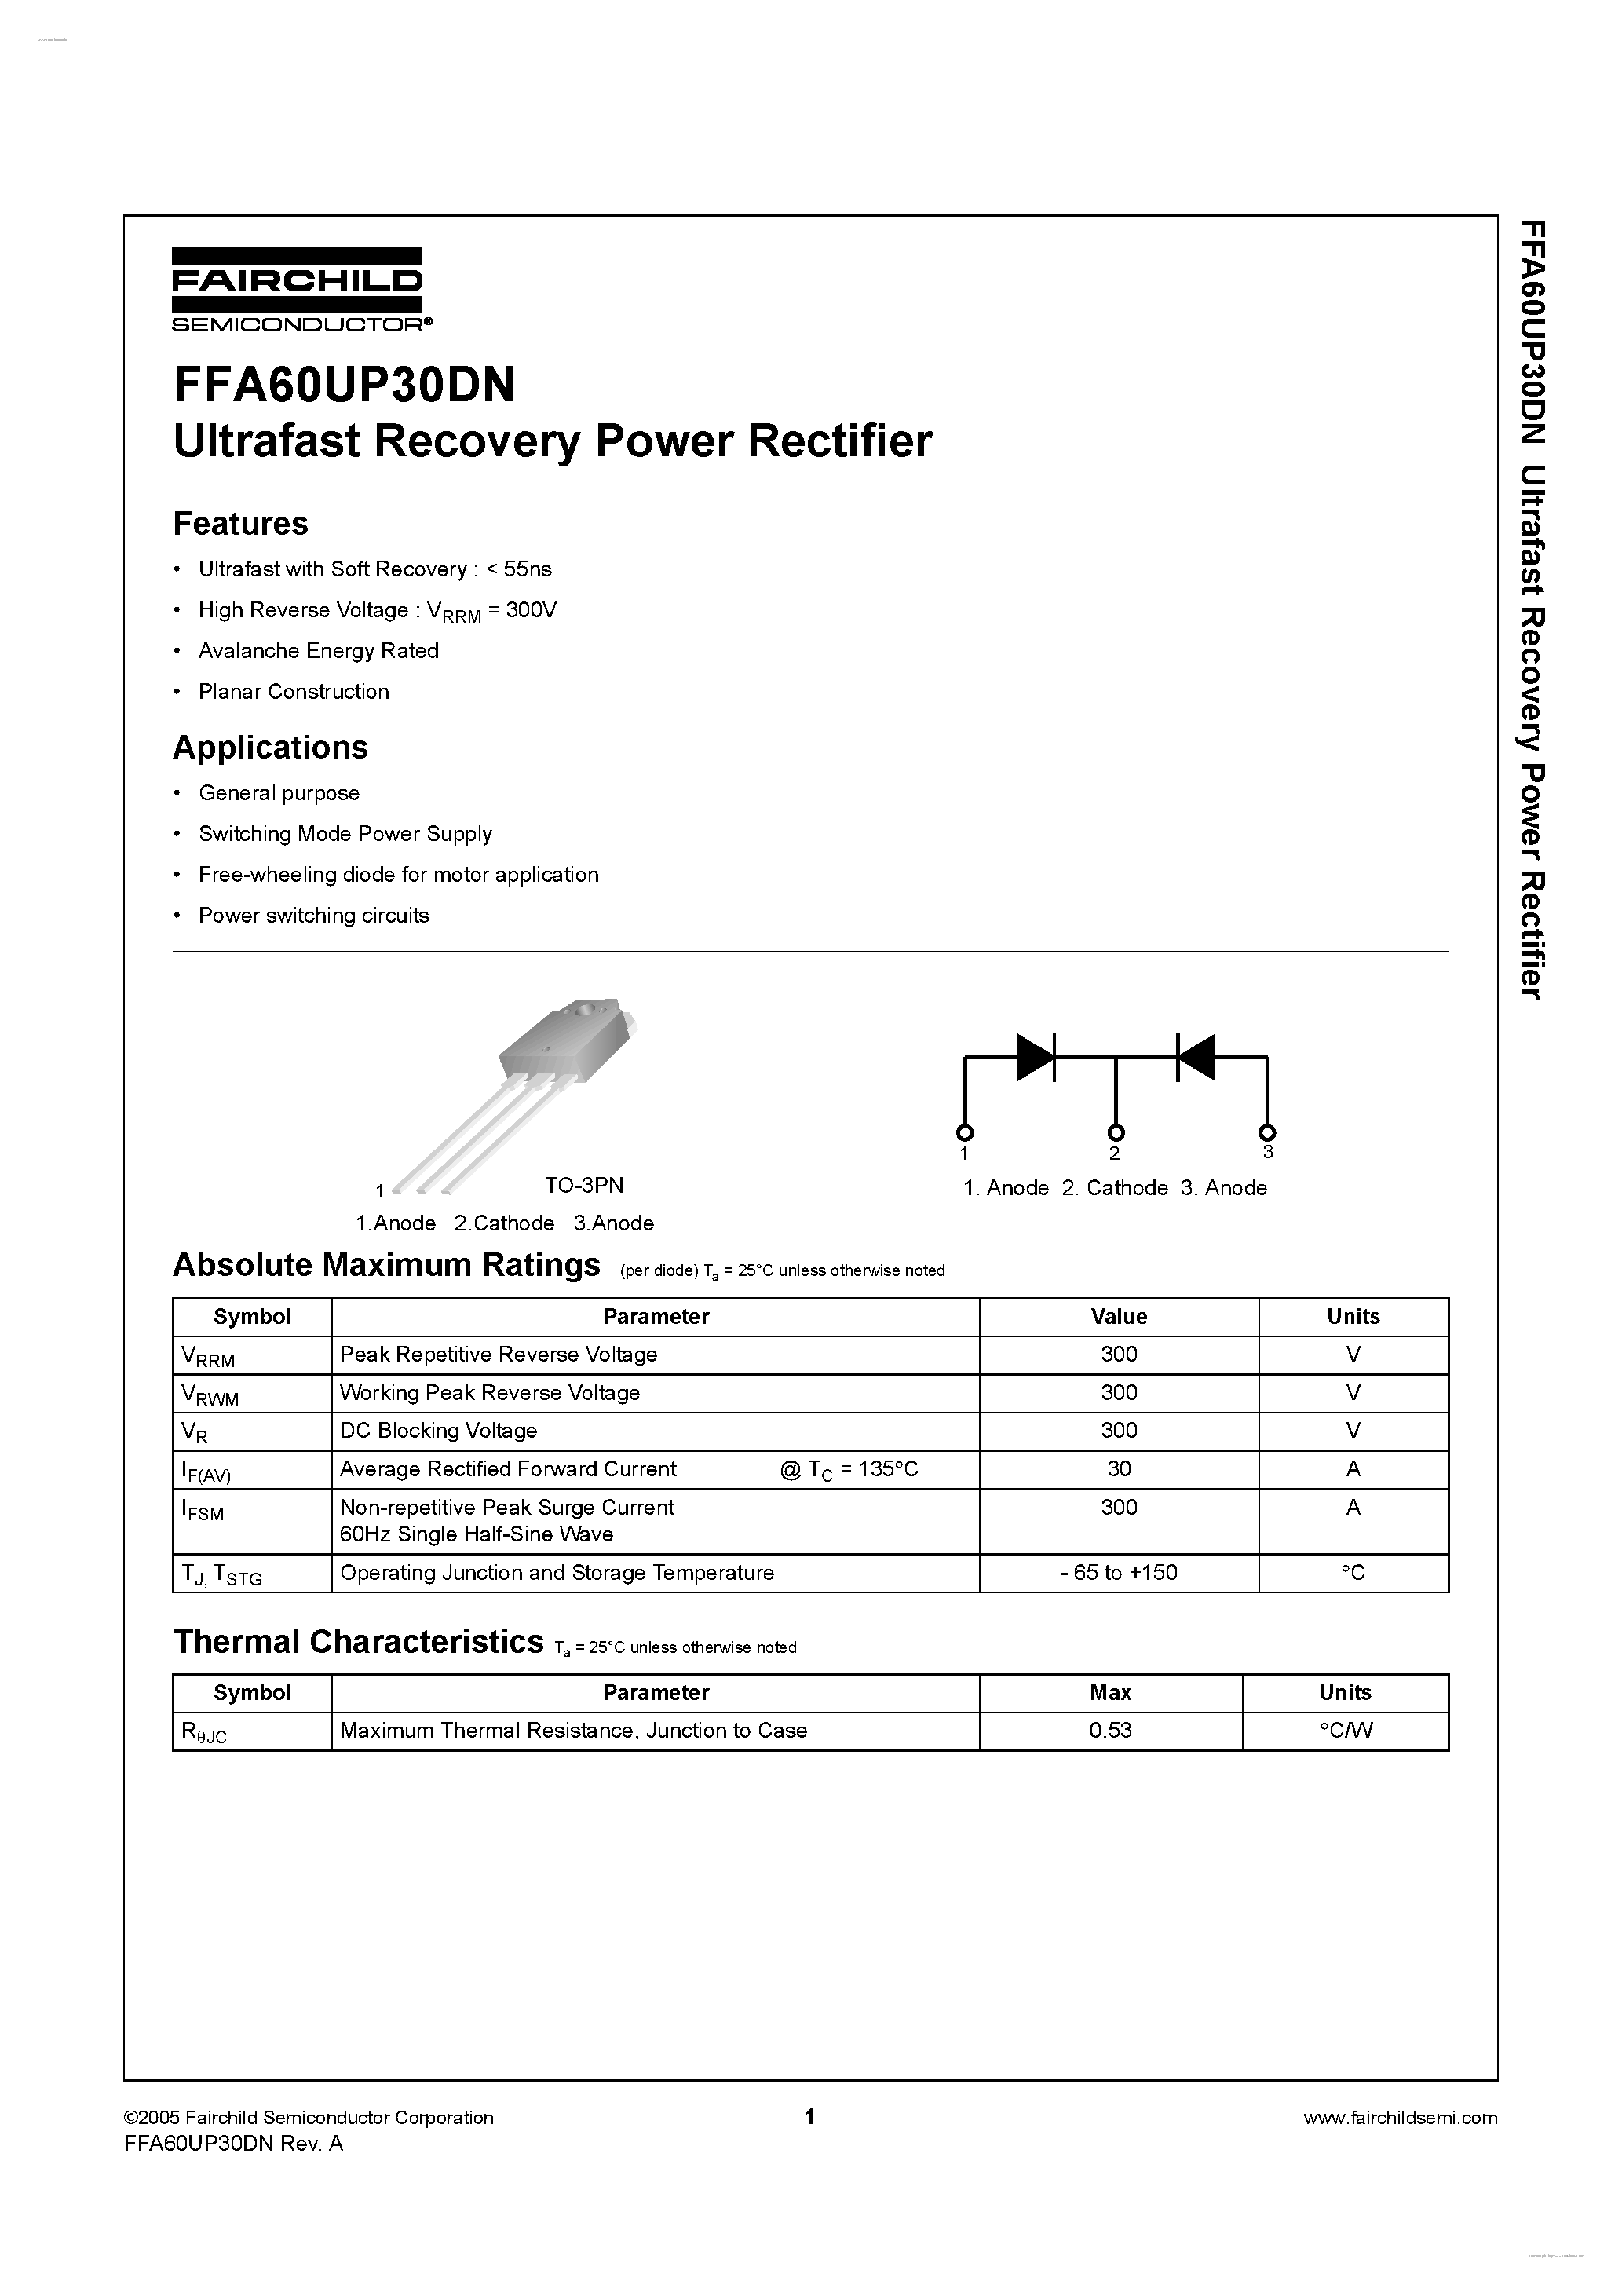 Даташит FFAF60UP30DN - Ultrafast Recovery Power Rectifier страница 1